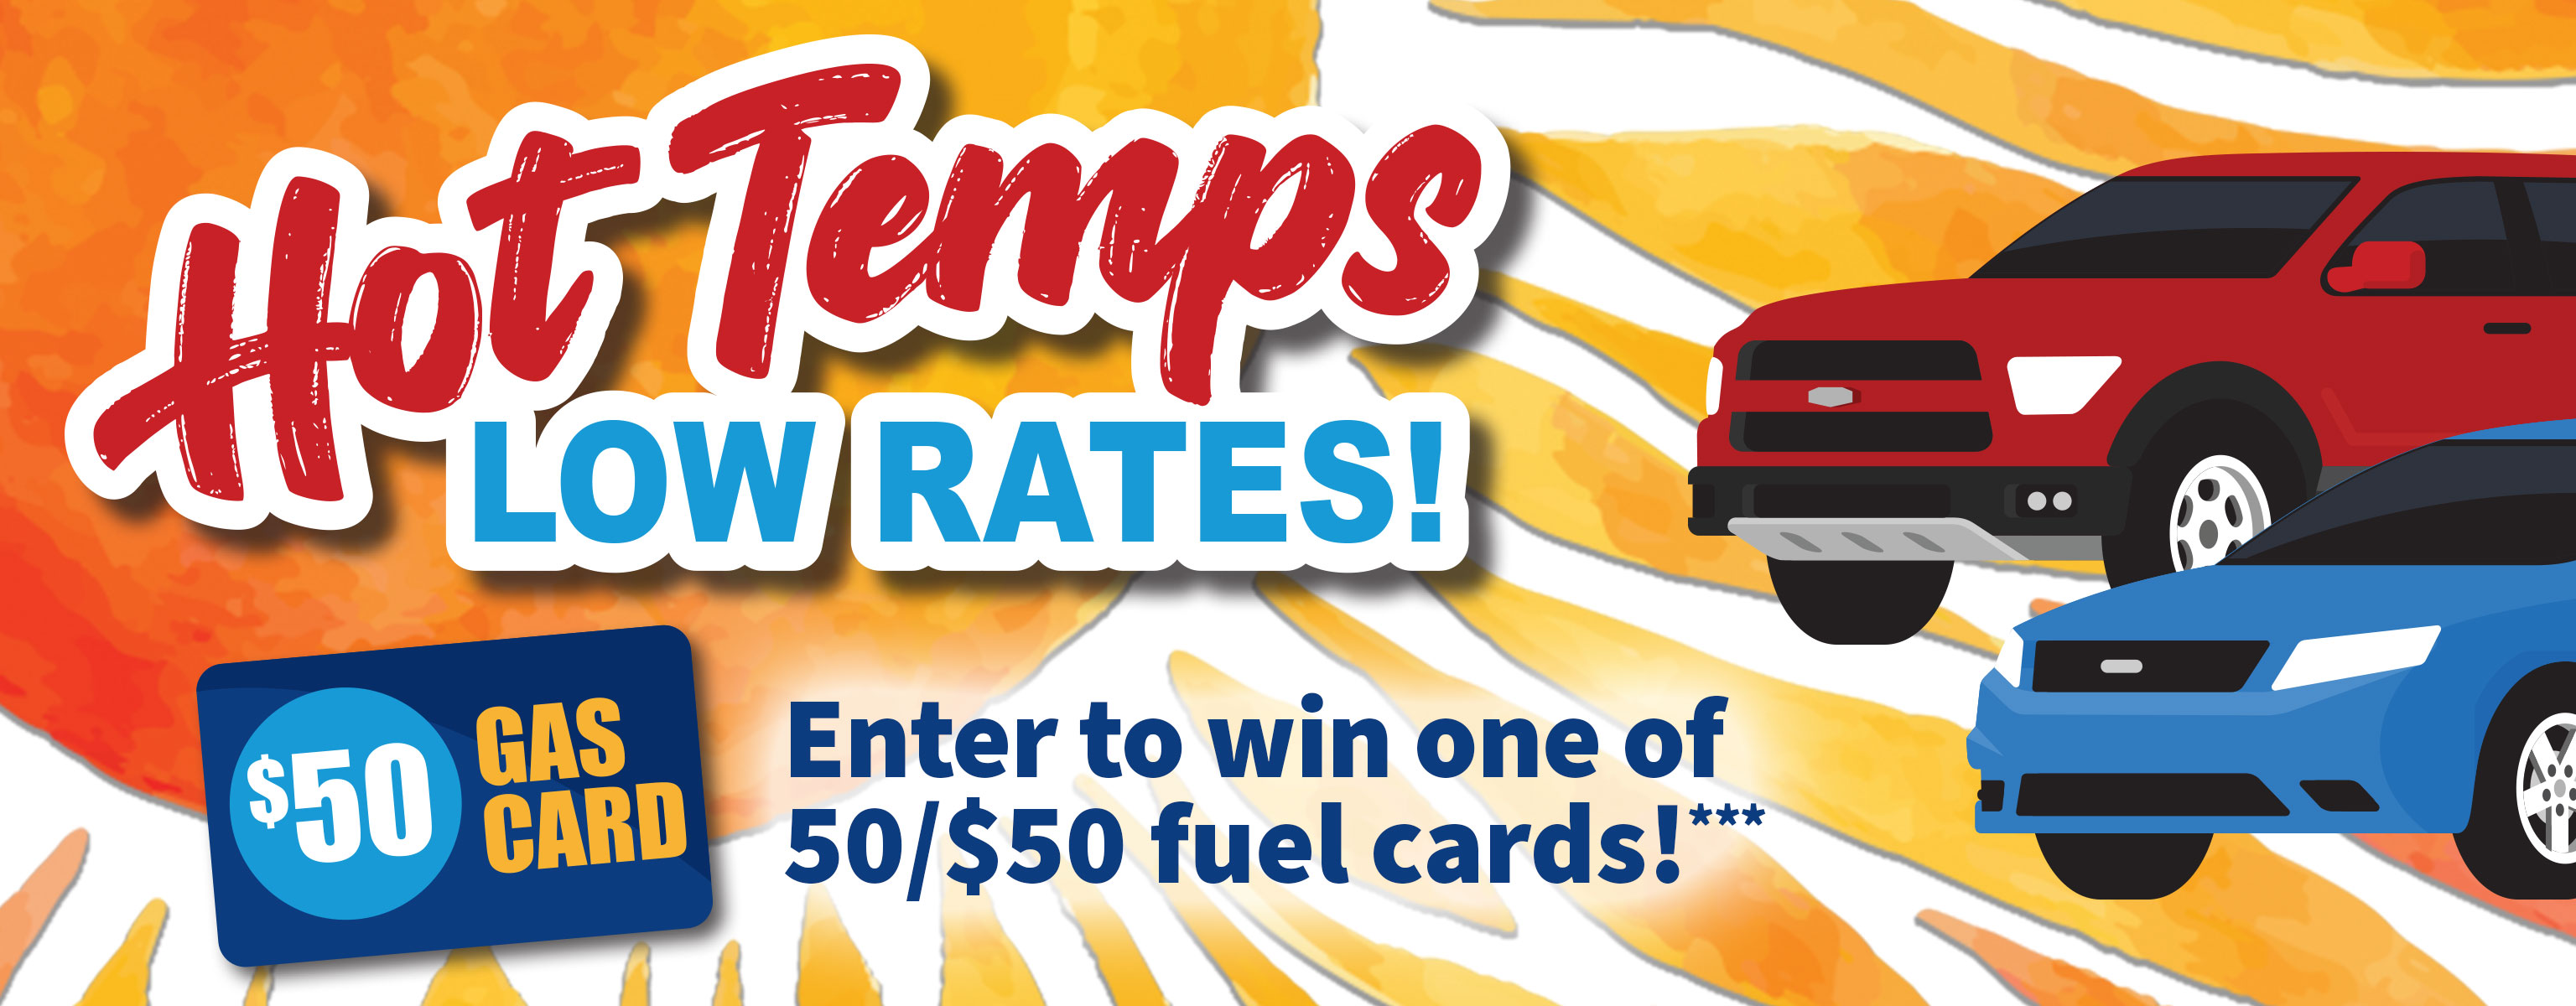 Hot Temps - Low Rates! Enter to win one of 50/$50 fuel cards!***